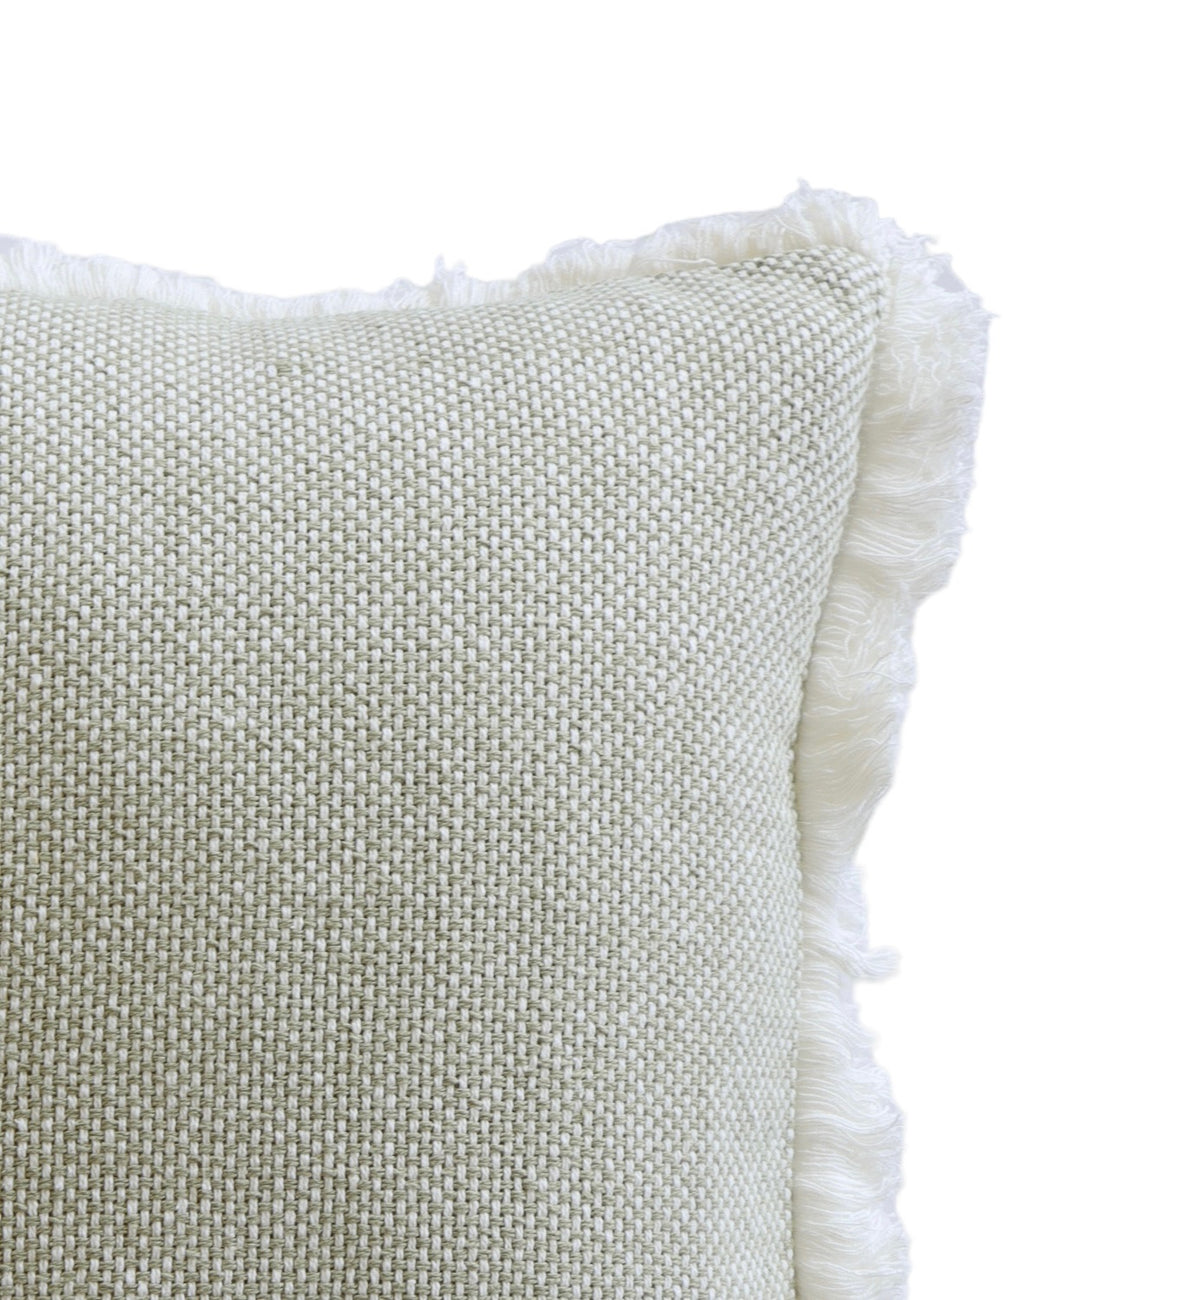 Zachary Sage Textured Woven Pillow Cover - 18 Inch - Holistic Habitat 